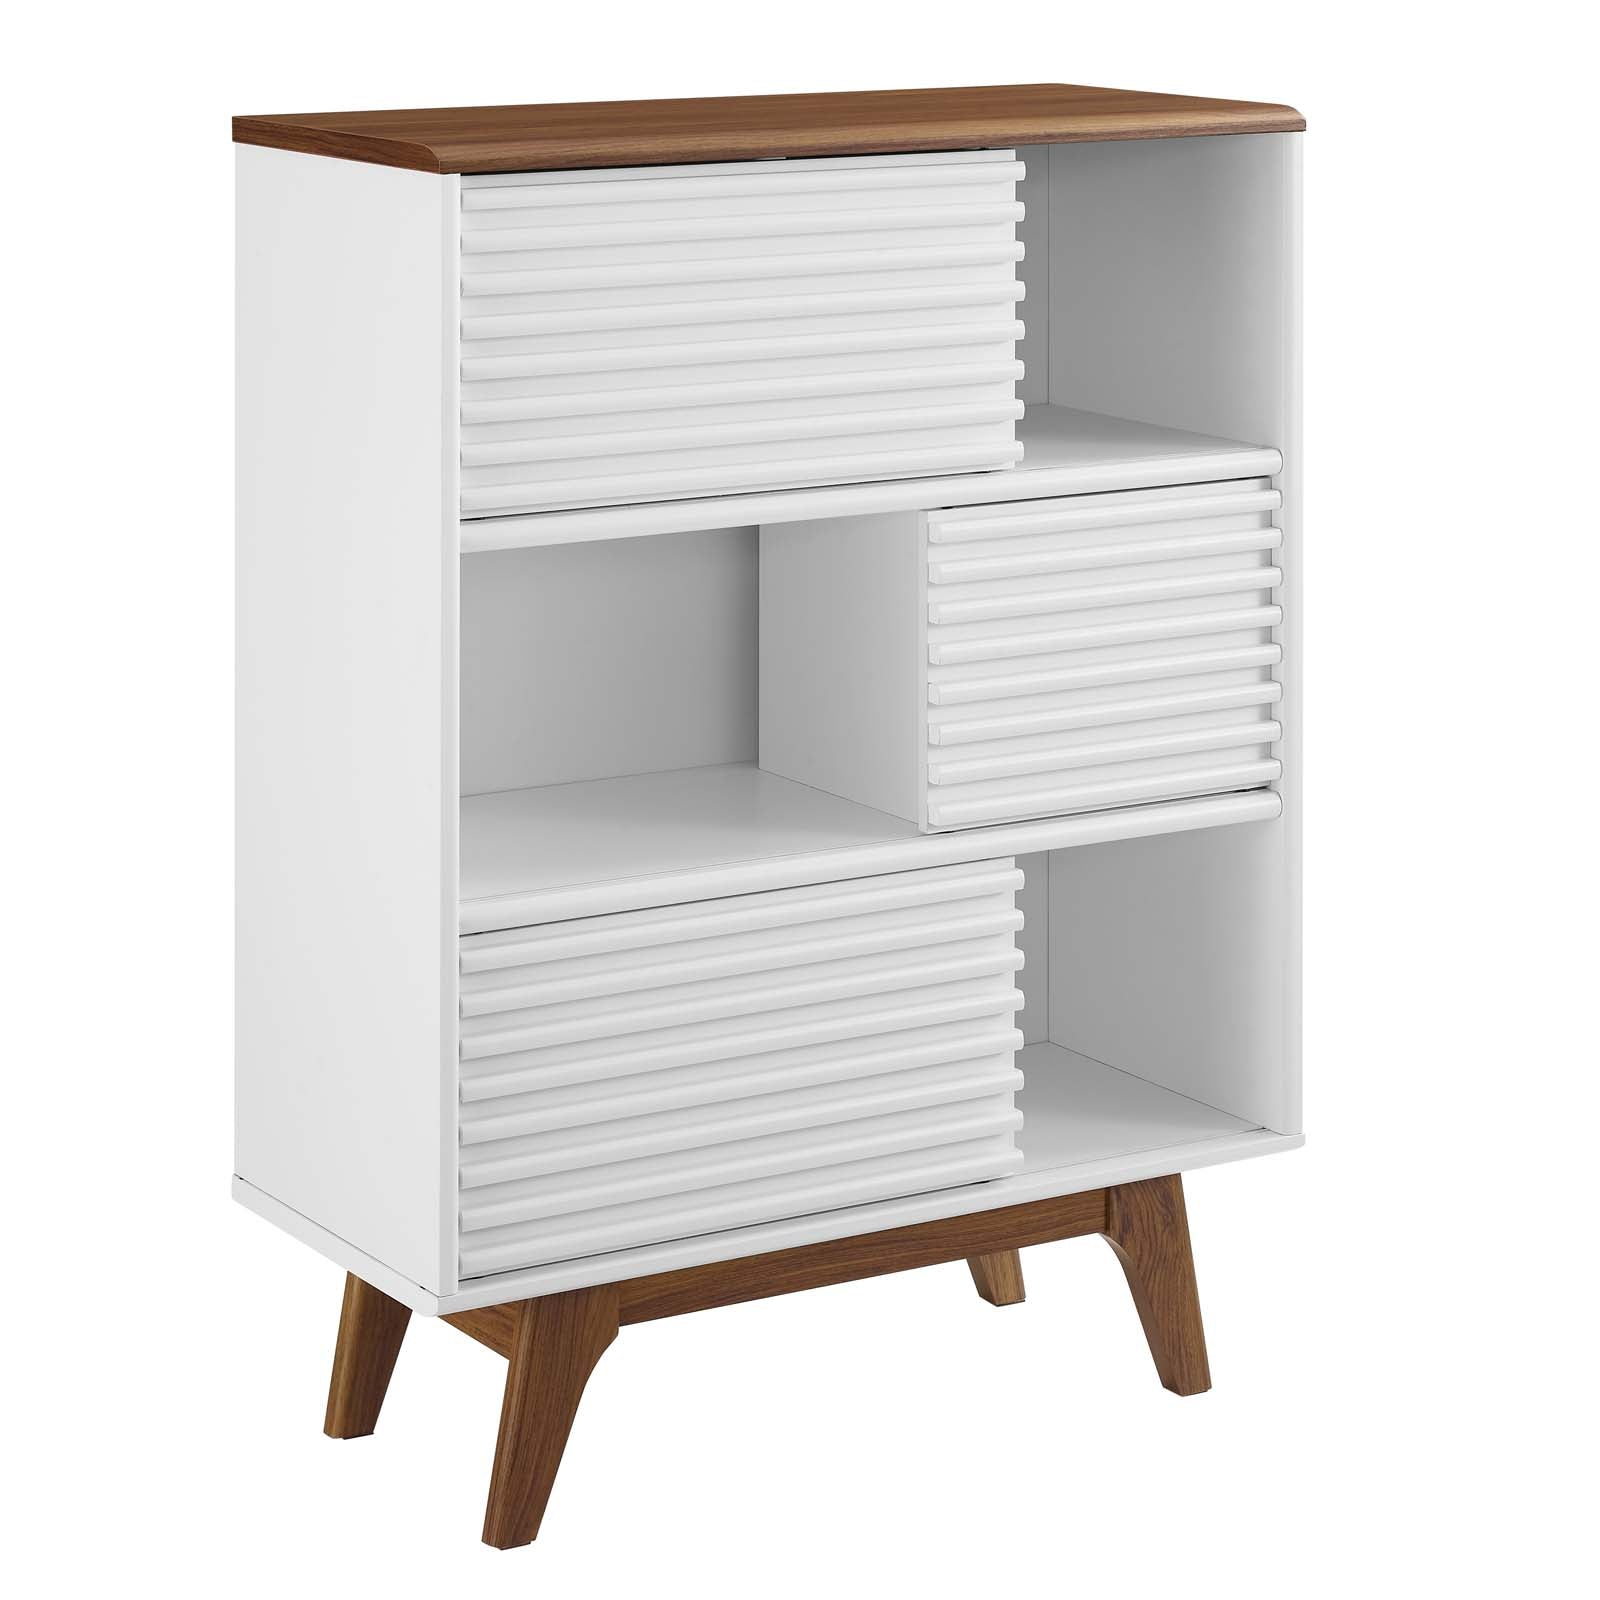 Render Three-Tier Display Storage Cabinet Stand - East Shore Modern Home Furnishings